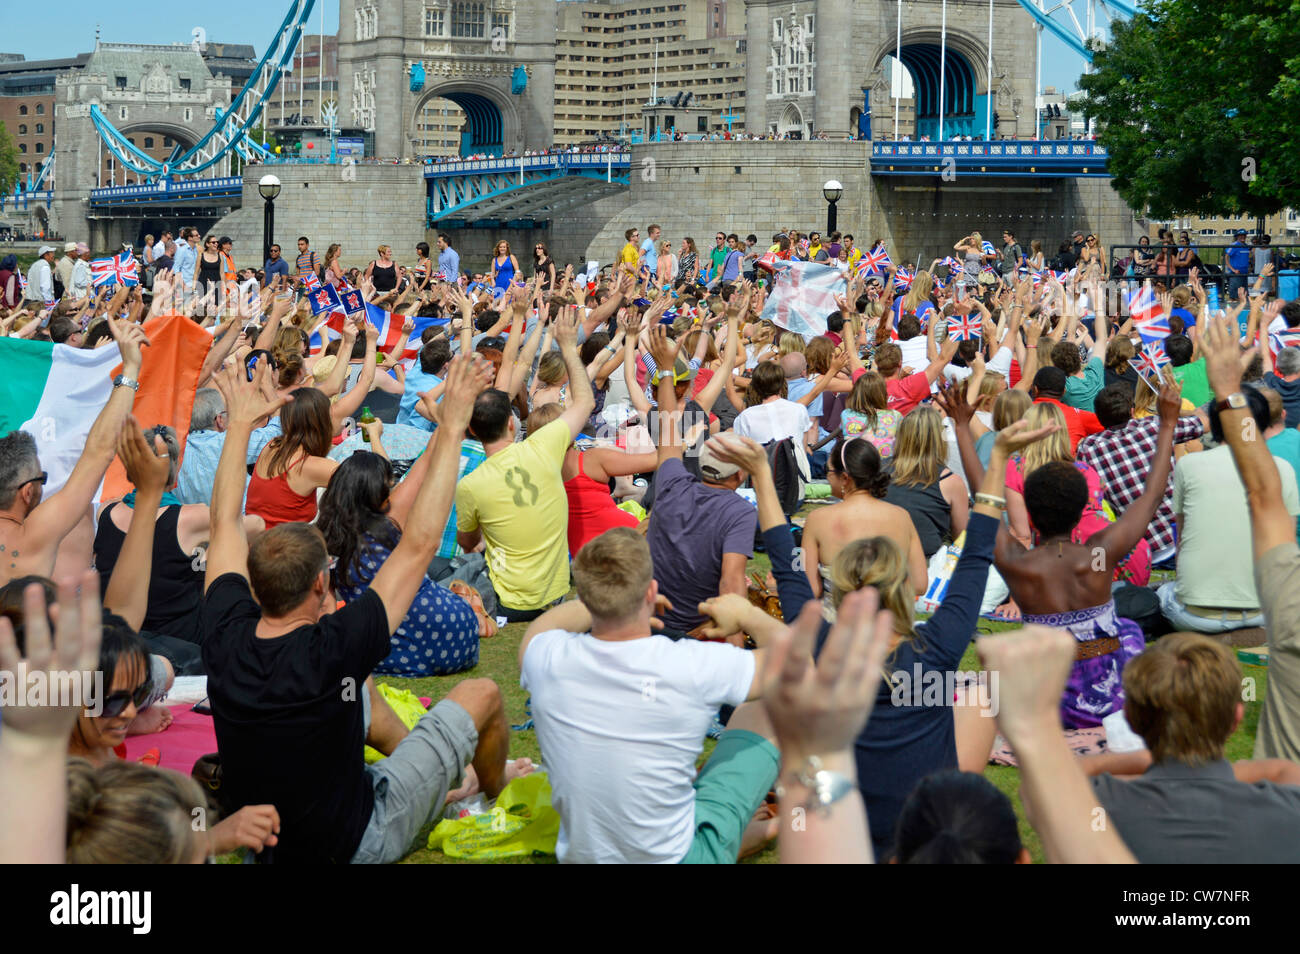 Crowd people sit on grass view London 2012 Olympic games TV large screen show hands up & waving Tower Bridge Potters Fields park Southwark England UK Stock Photo